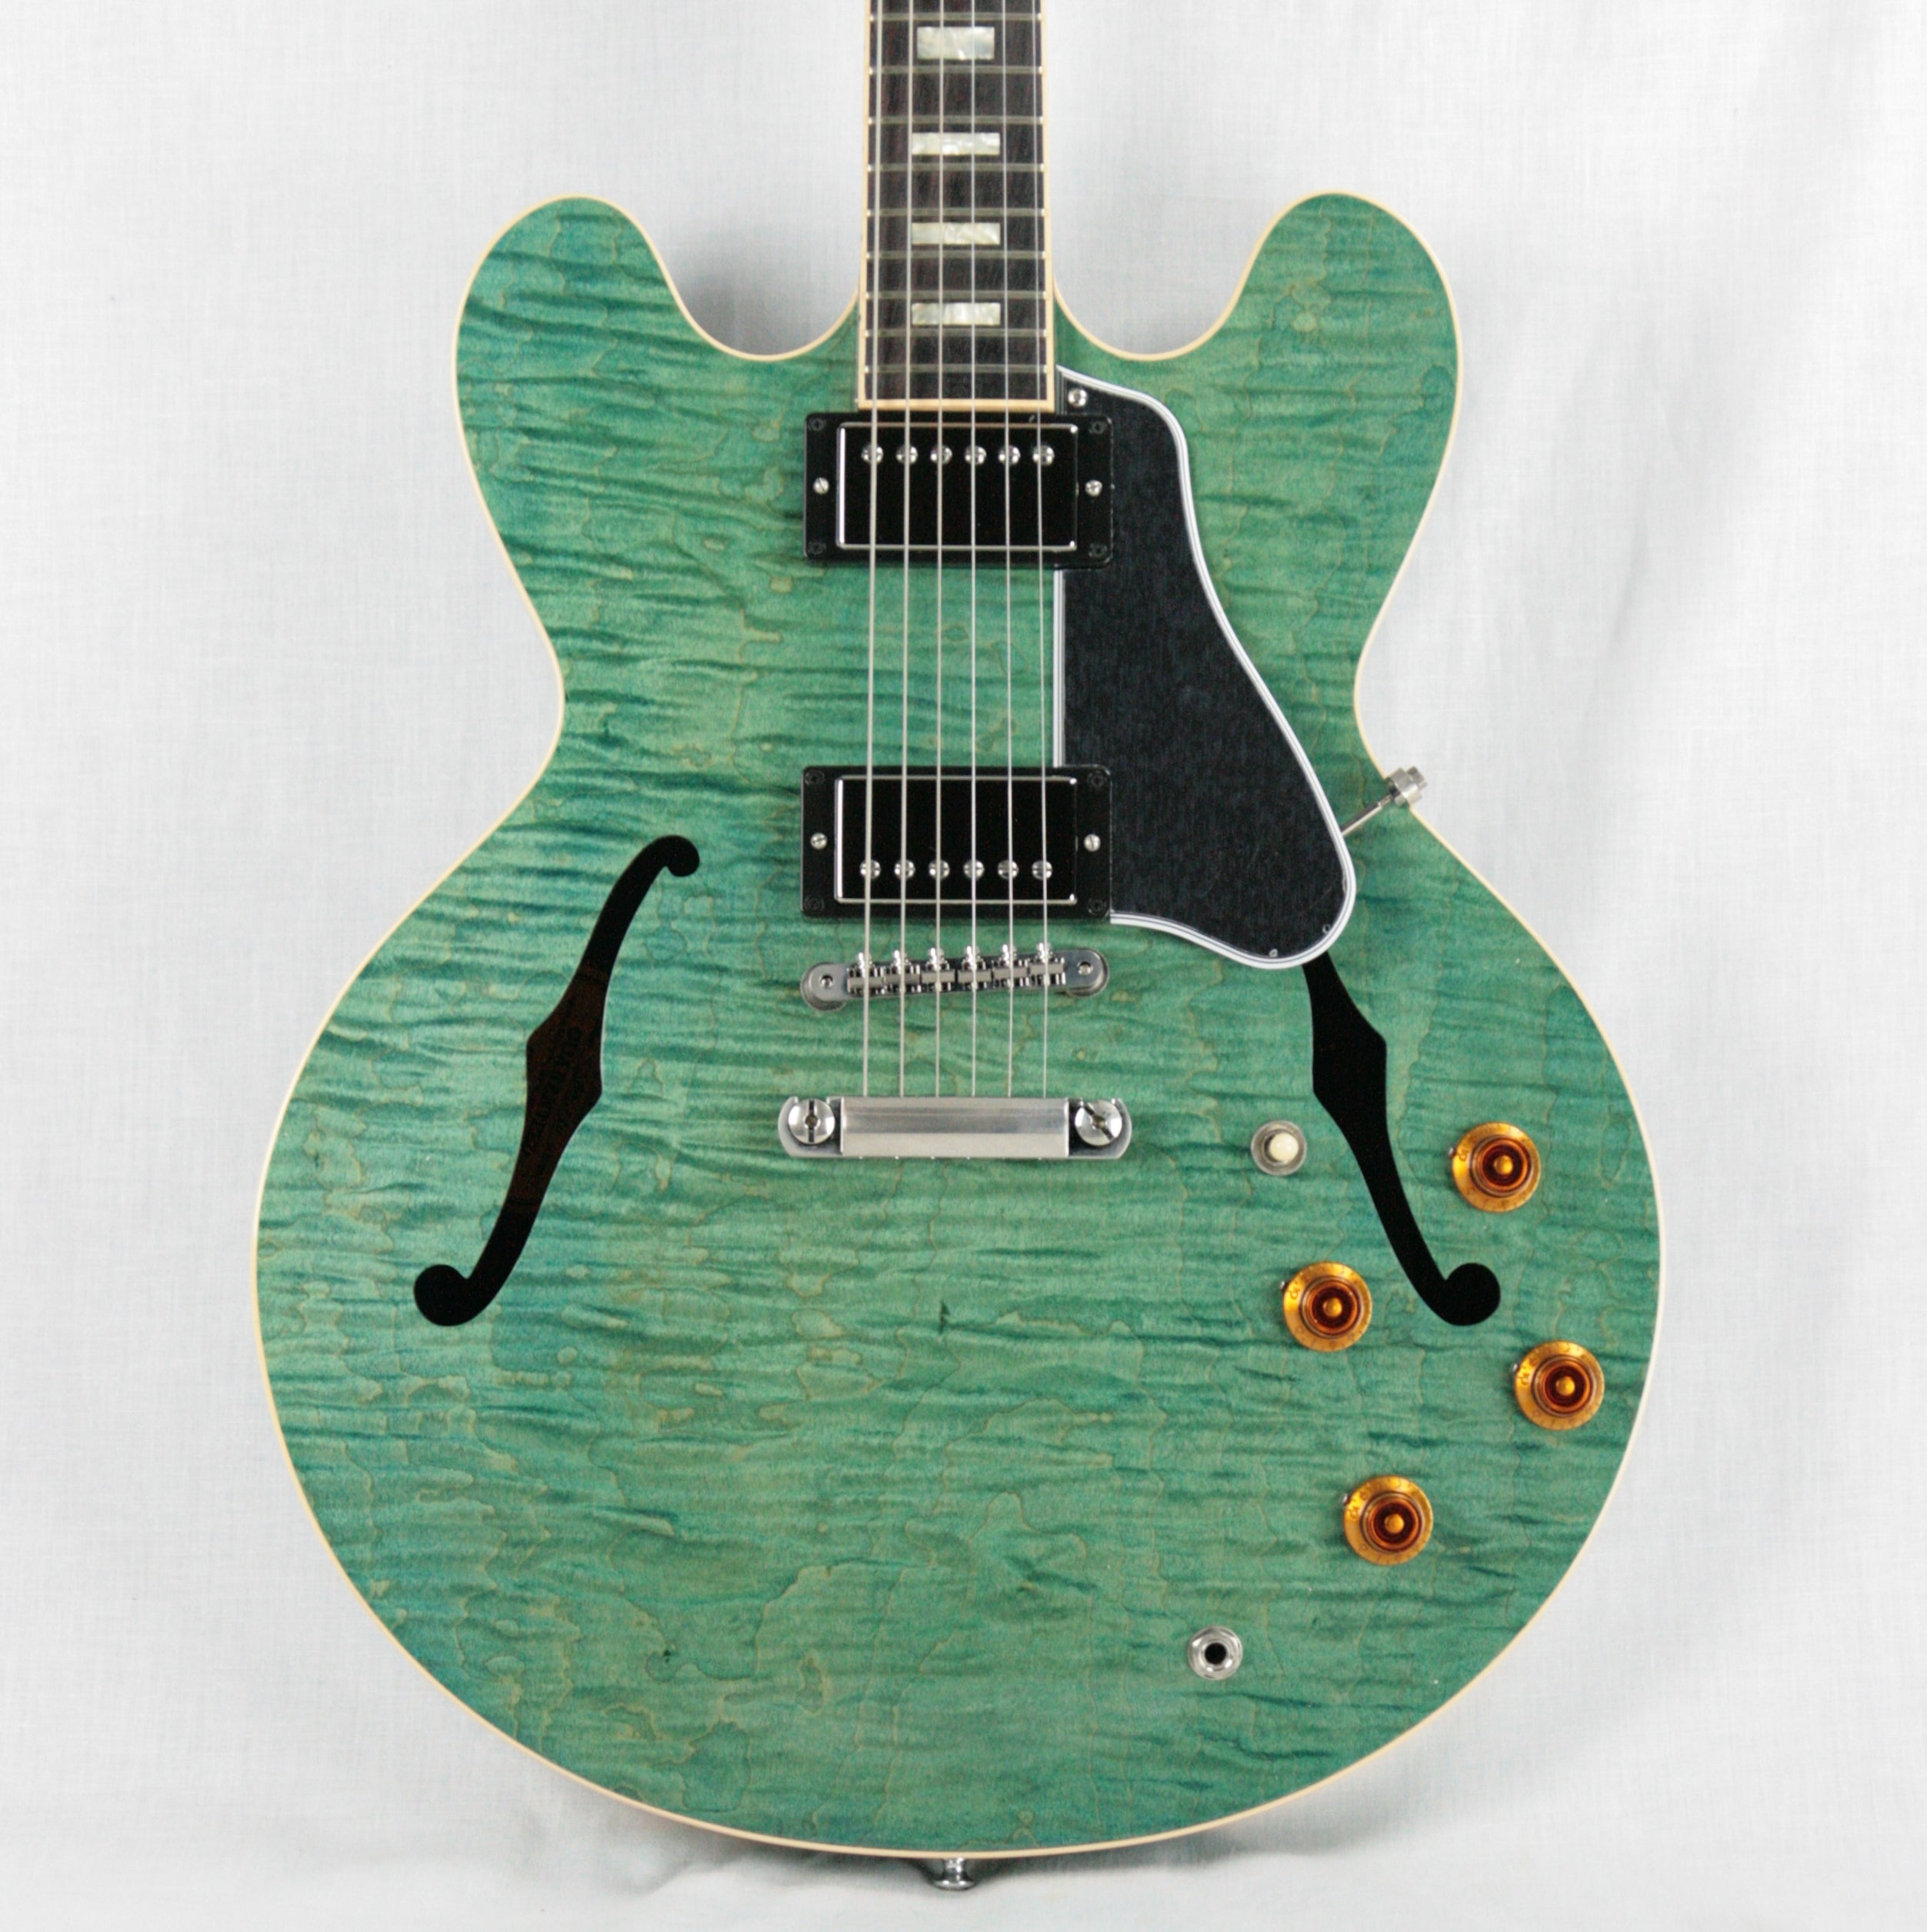 *SOLD*  2016 Gibson ES-335 FIGURED Turquoise Limited Edition! Block inlays, Flametop! Memphis